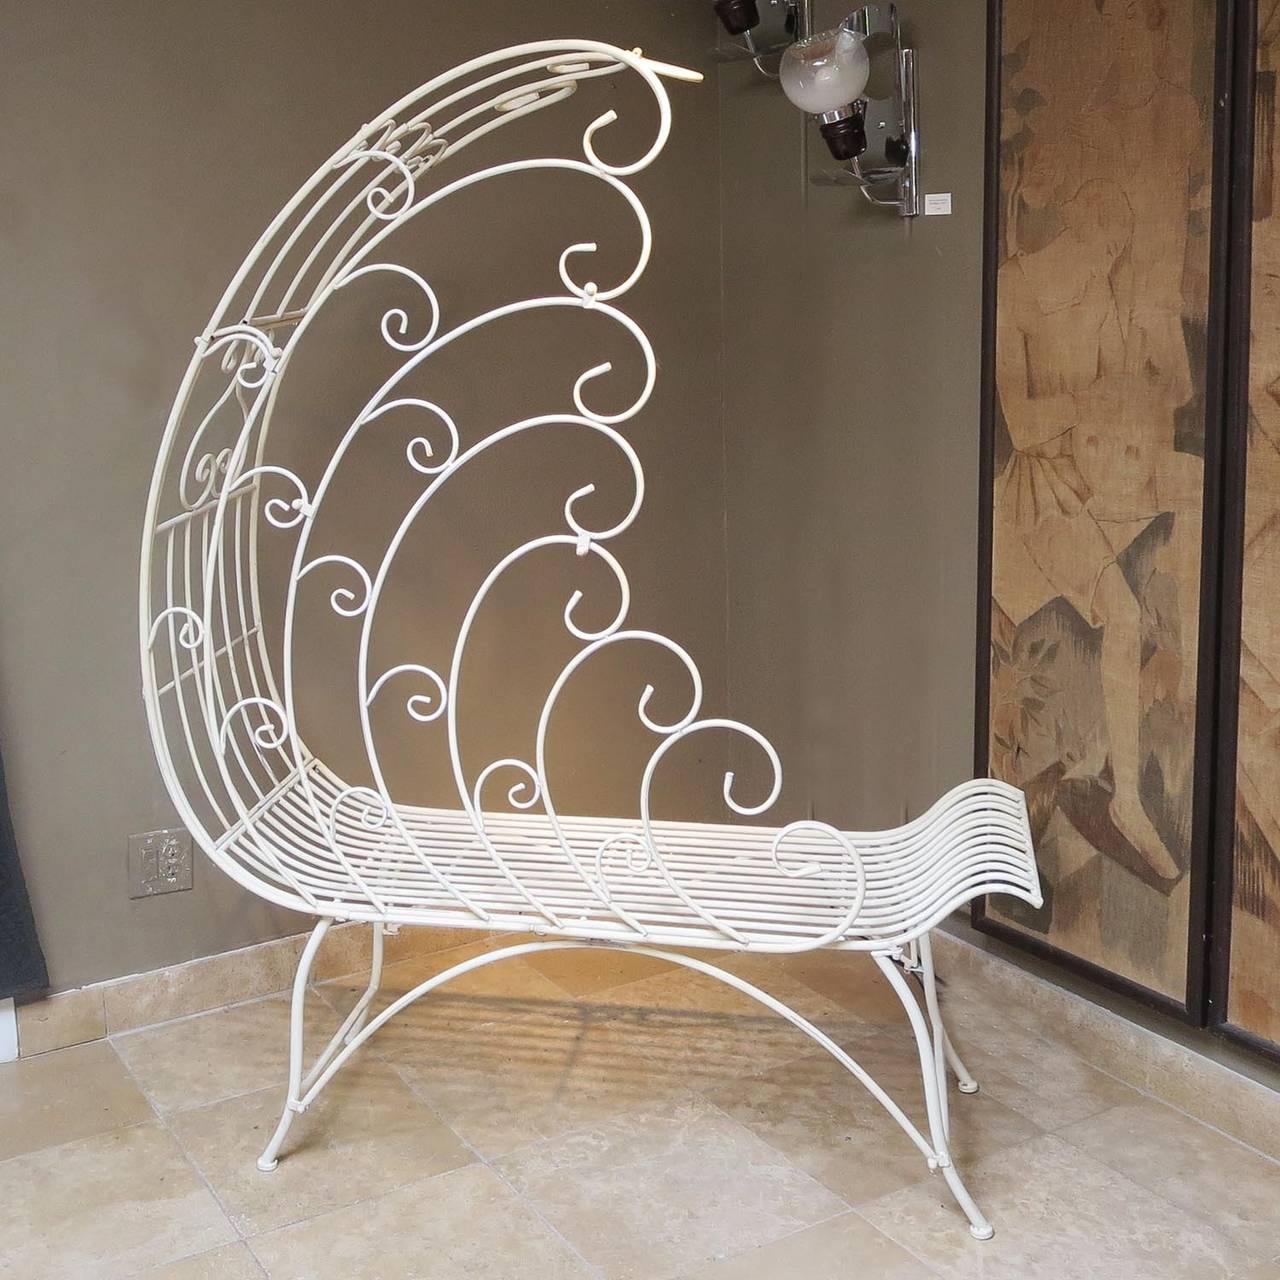 Mid-20th Century Painted Metal Patio Chaise